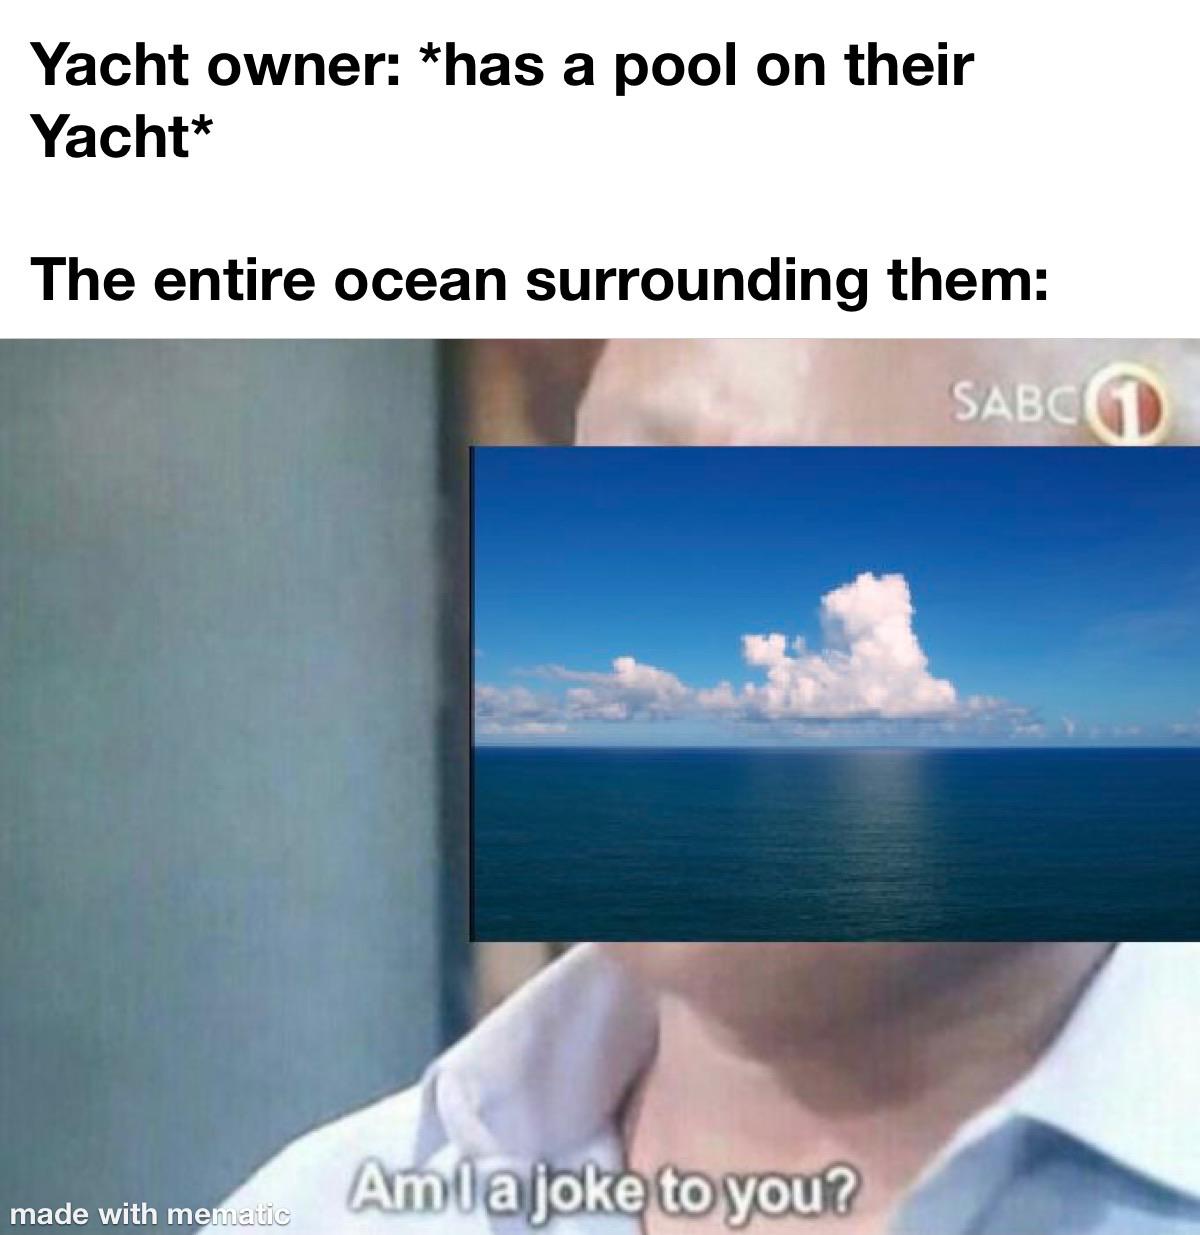 Funny, SABC, Ocean, No, Jaws other memes Funny, SABC, Ocean, No, Jaws text: Yacht owner: *has a pool on their Yacht* The entire ocean surrounding them: SABC made with m Am 17joke to you? -e 